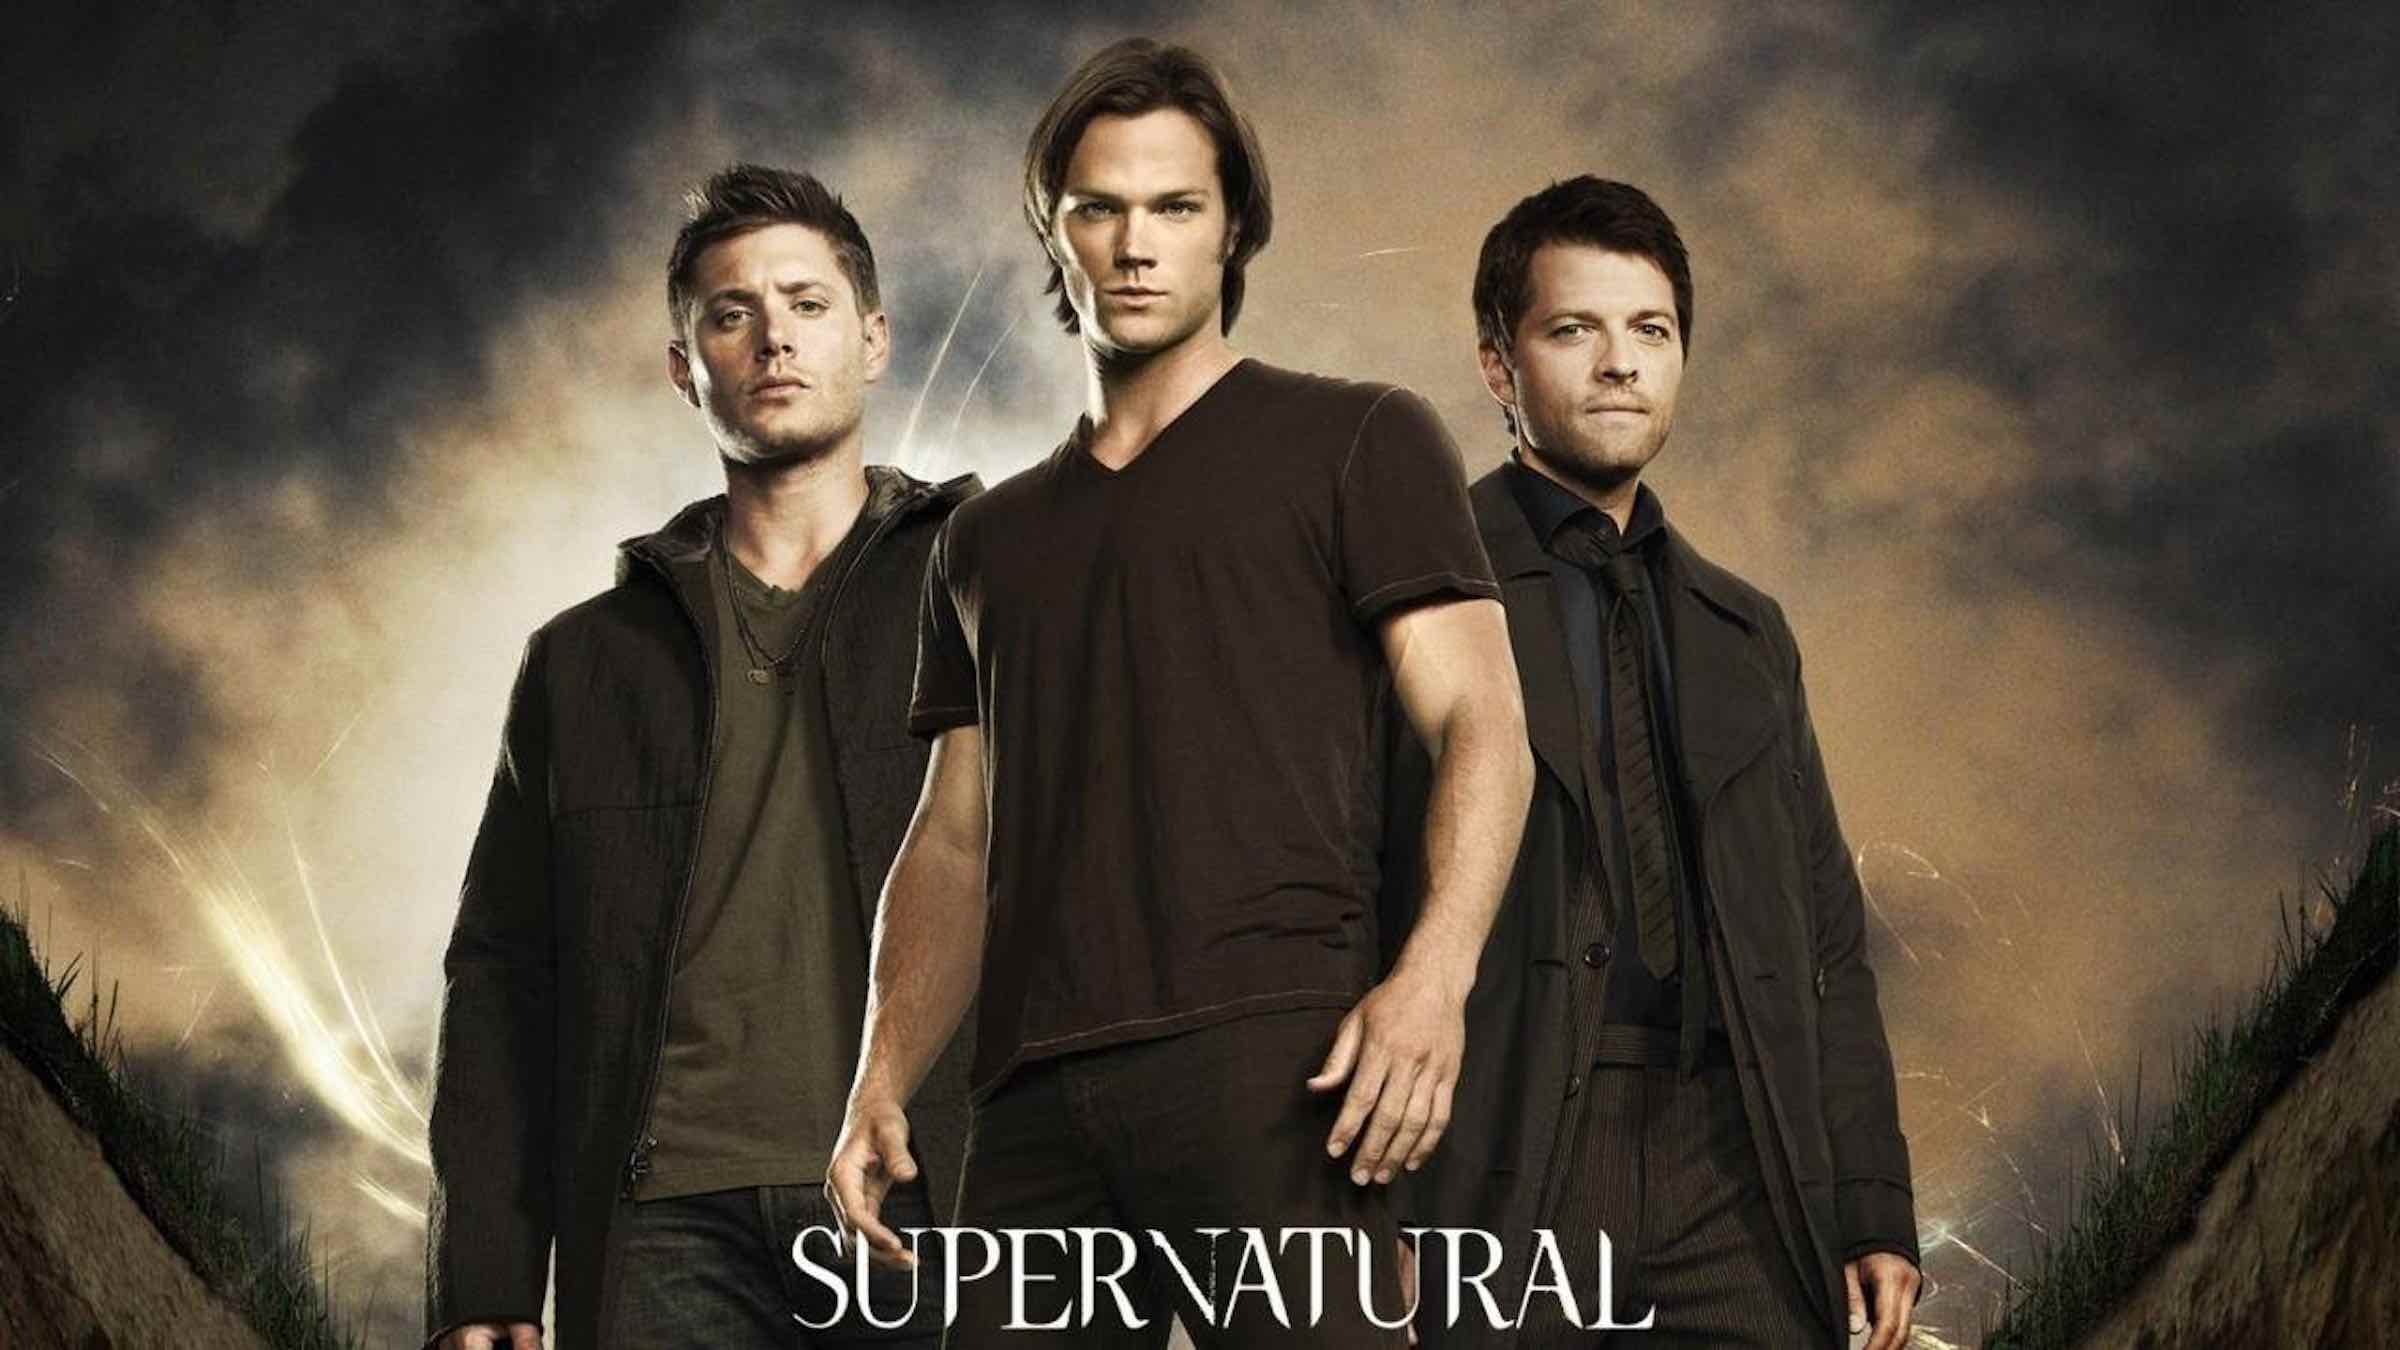 'Supernatural' has been a TV staple for two decades. Test how much you know about the show with our quiz!